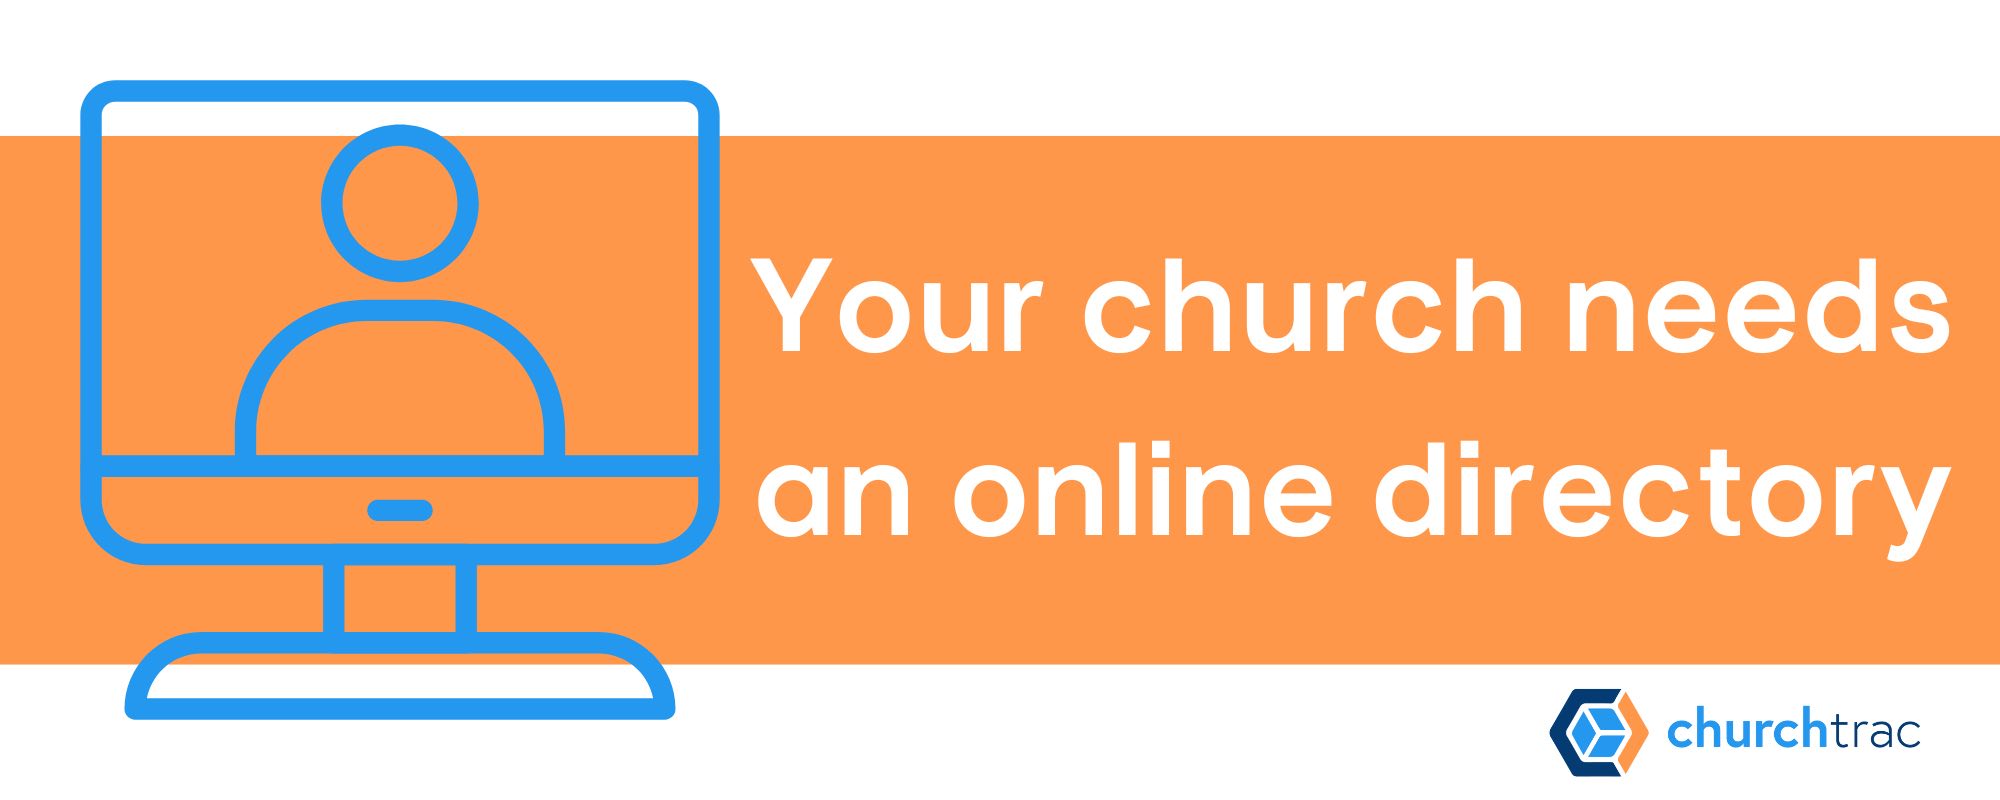 Your church absolutely needs an online church directory software